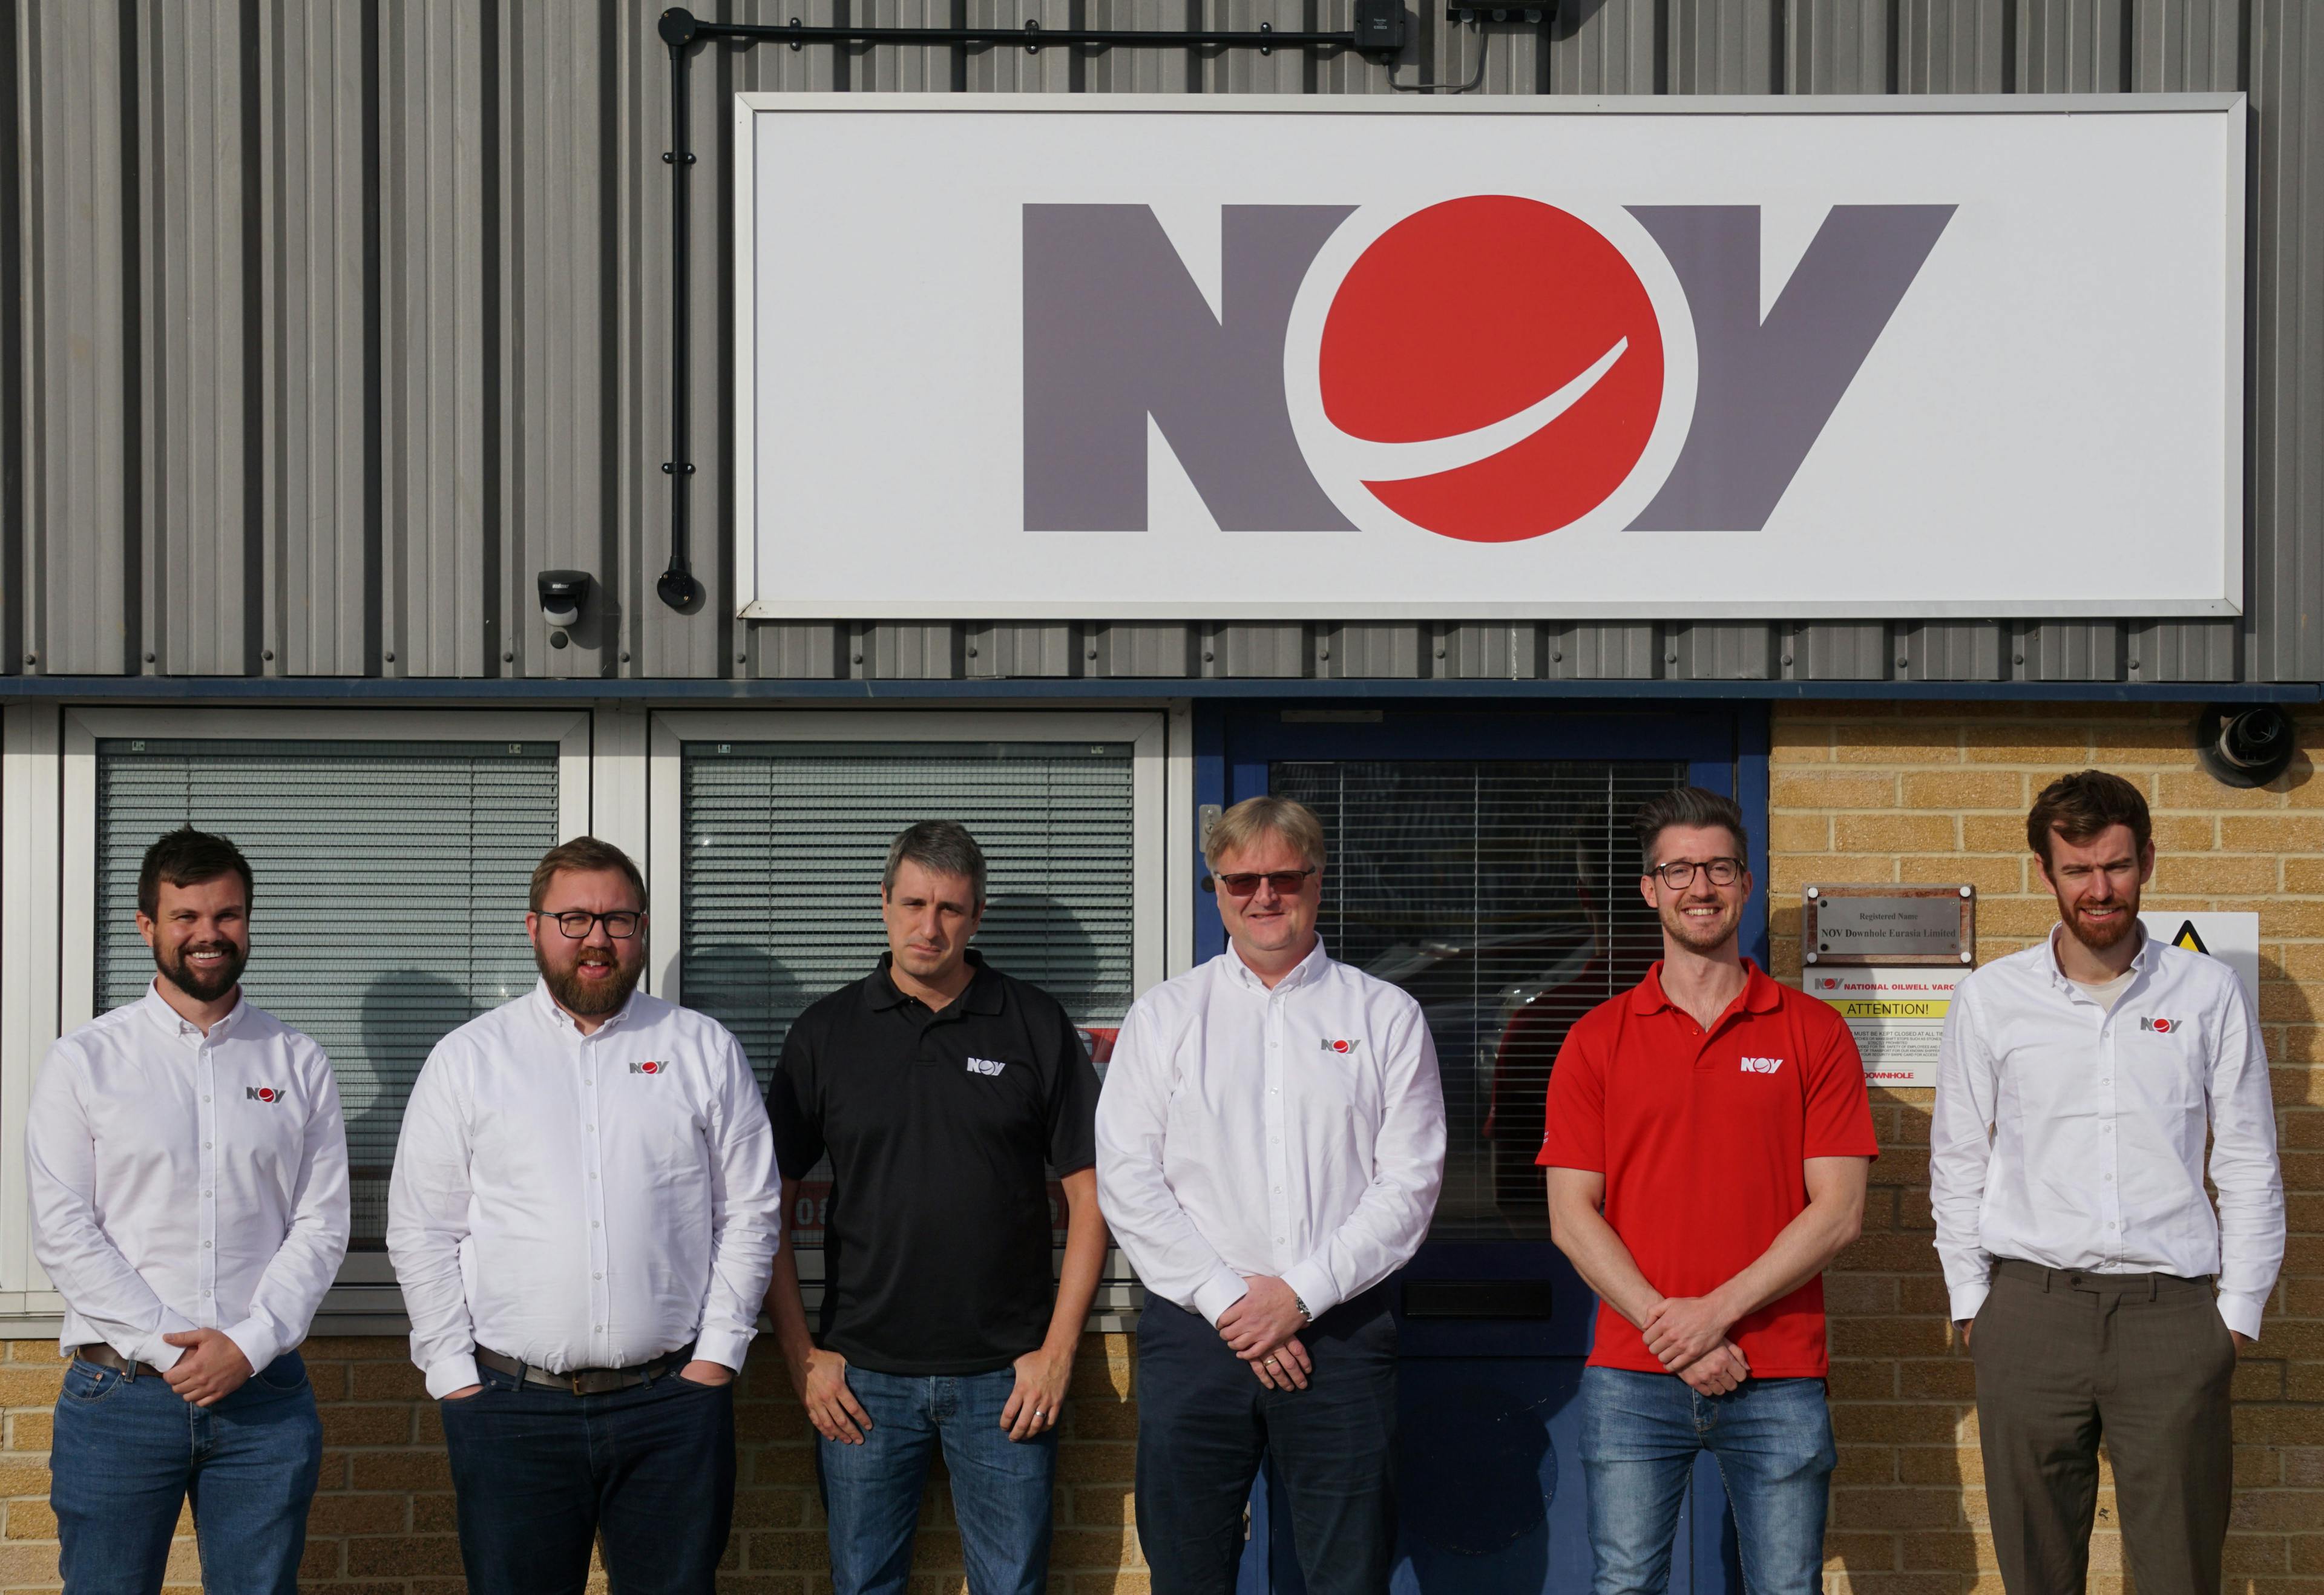 Group photo of the NOV Cable Lay team in front of an NOV building